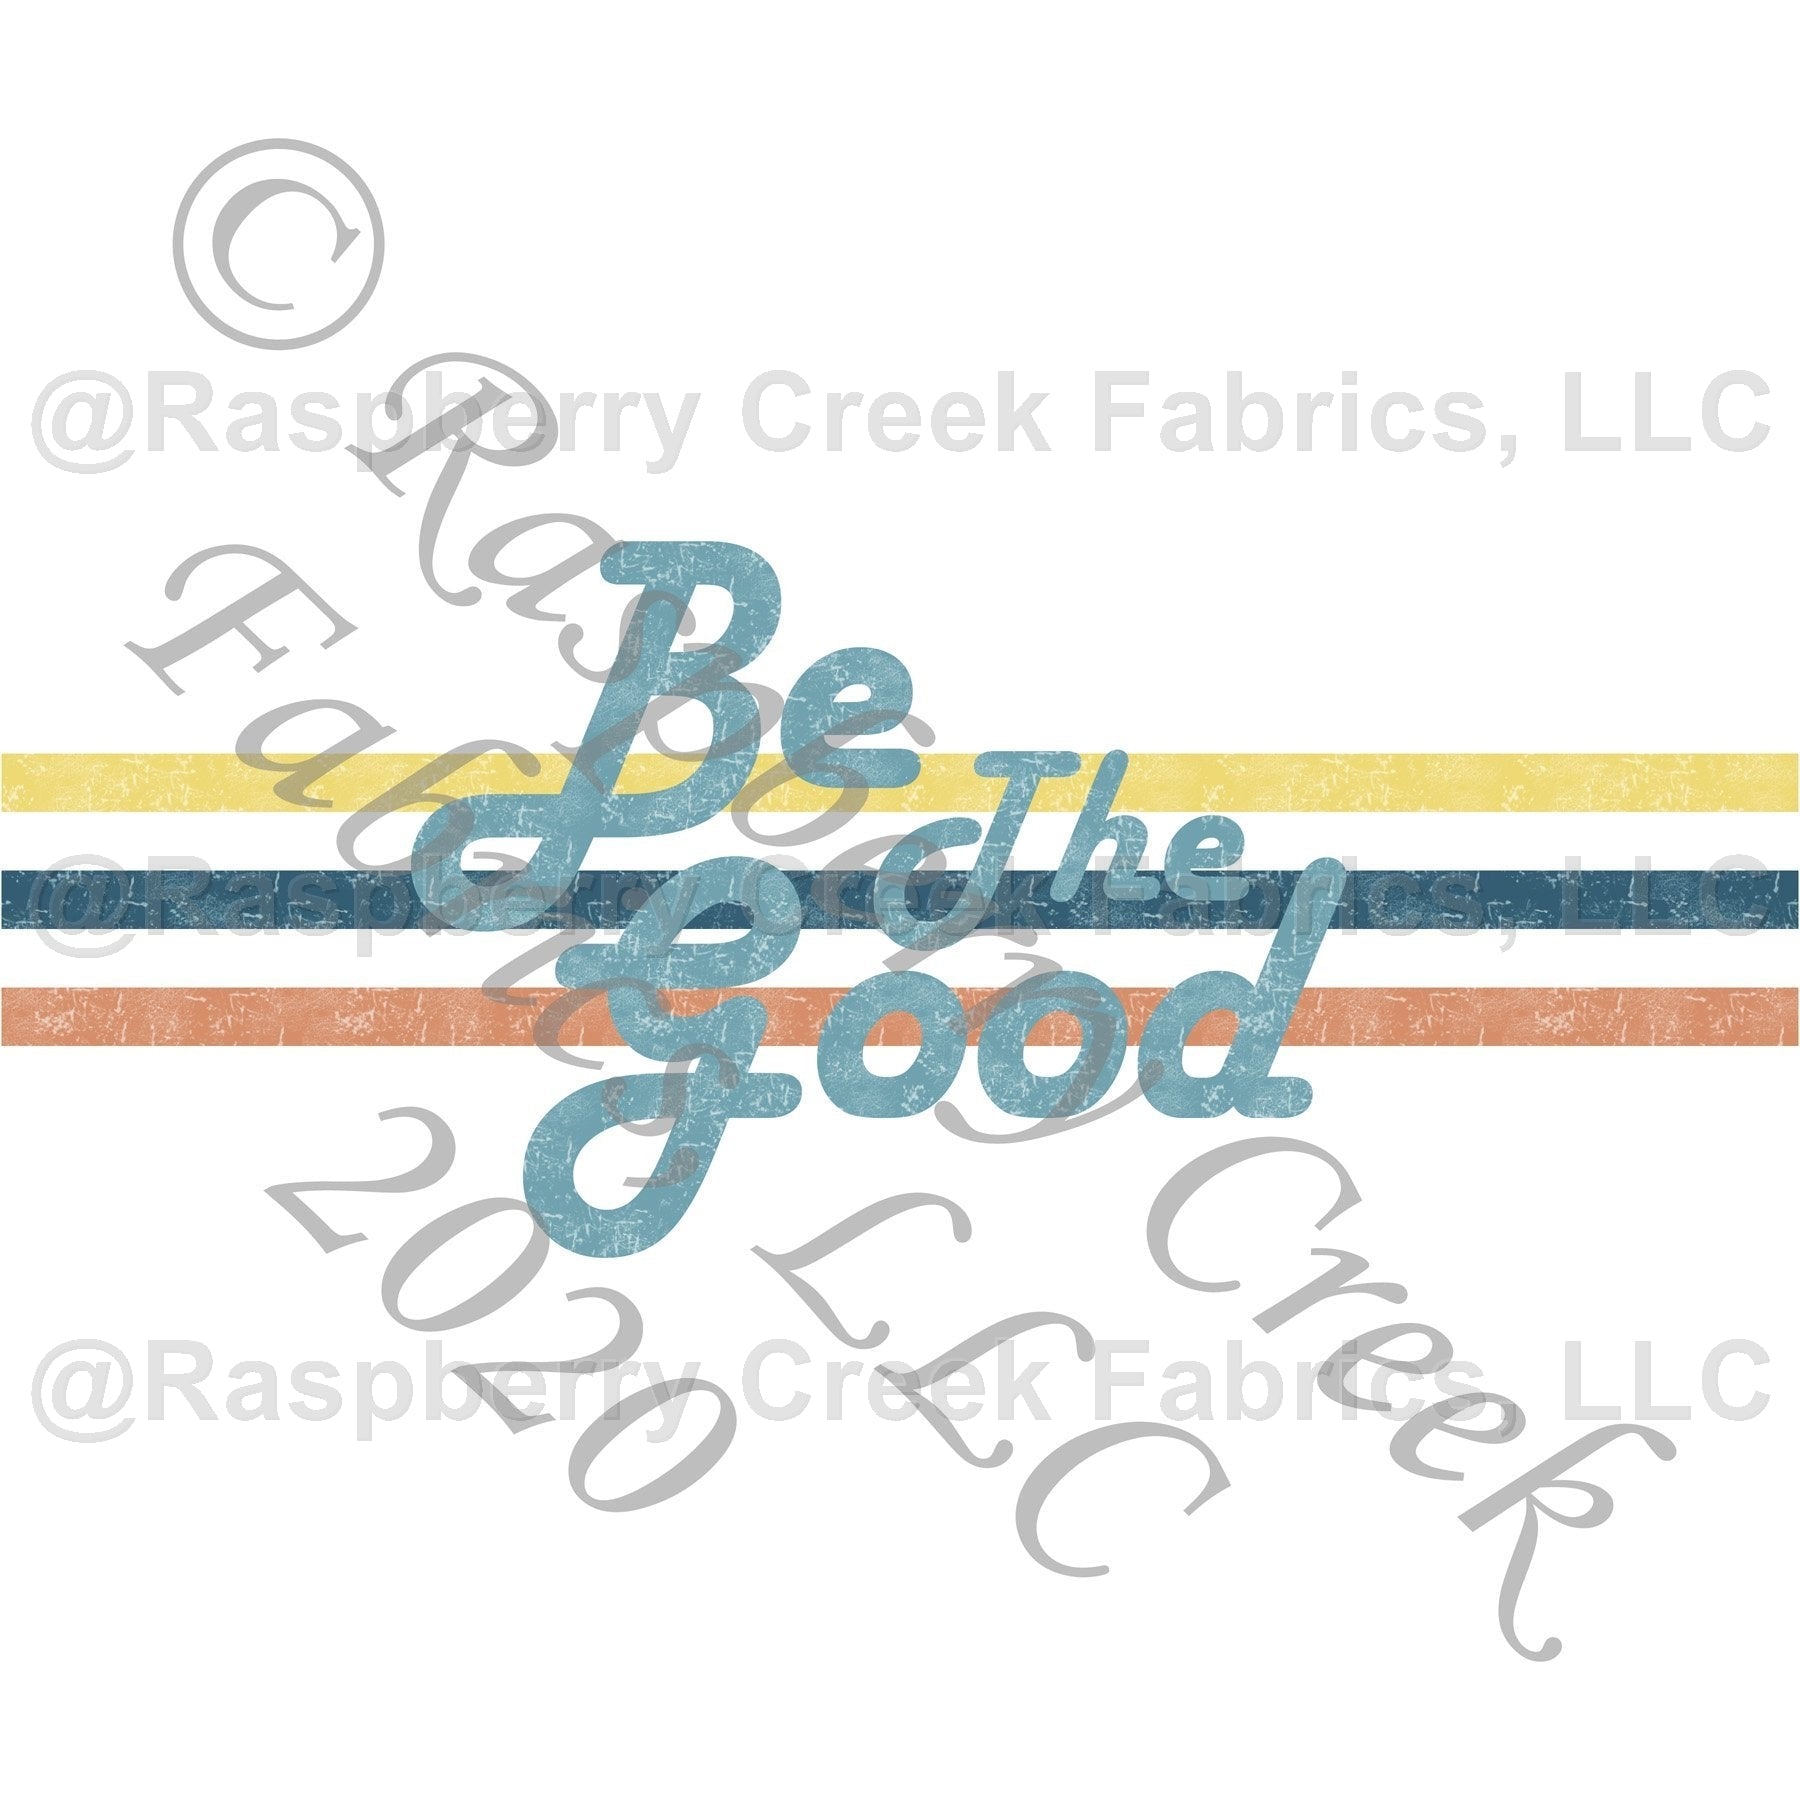 Teal Yellow and Orange Weathered Look Be The Good Panel, Be Kind for Club Fabrics Fabric, Raspberry Creek Fabrics, watermarked